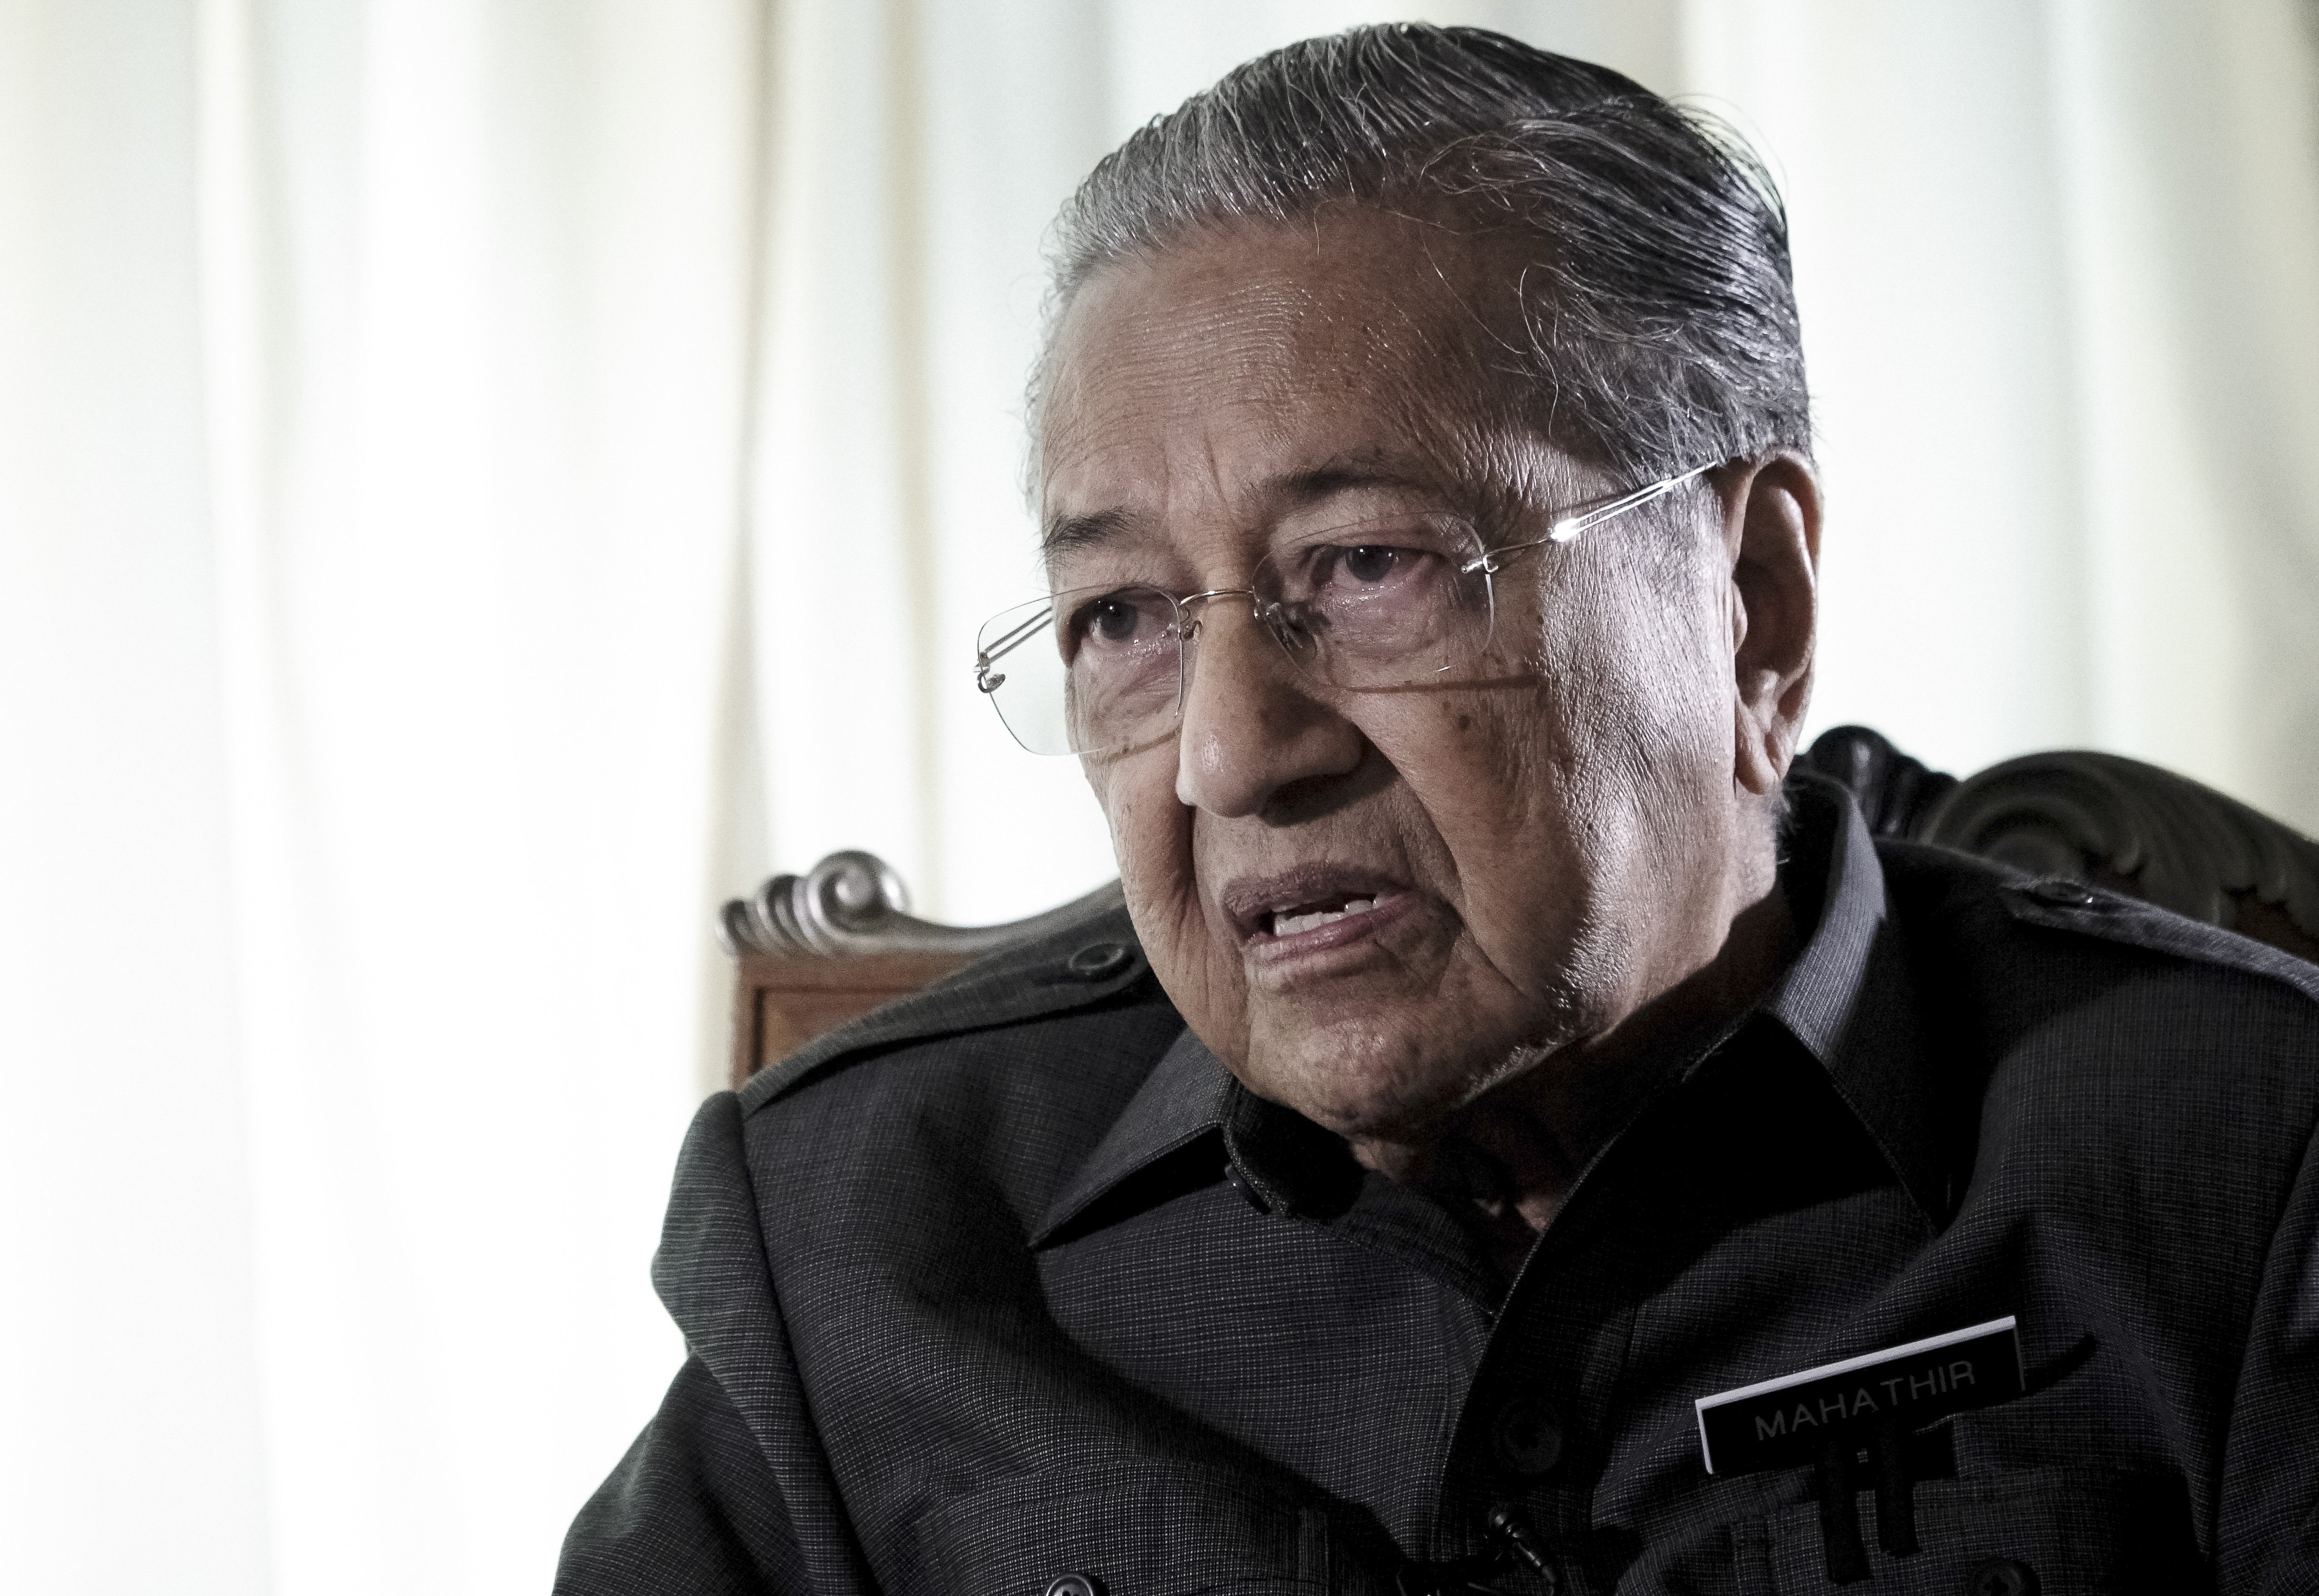 ‘There’s nothing to be afraid of,’ when it comes to China, the Malaysian leader says in an exclusive interview with the SCMP. Yet, while he is not anti-China, he is not always pro-Chinese investment either